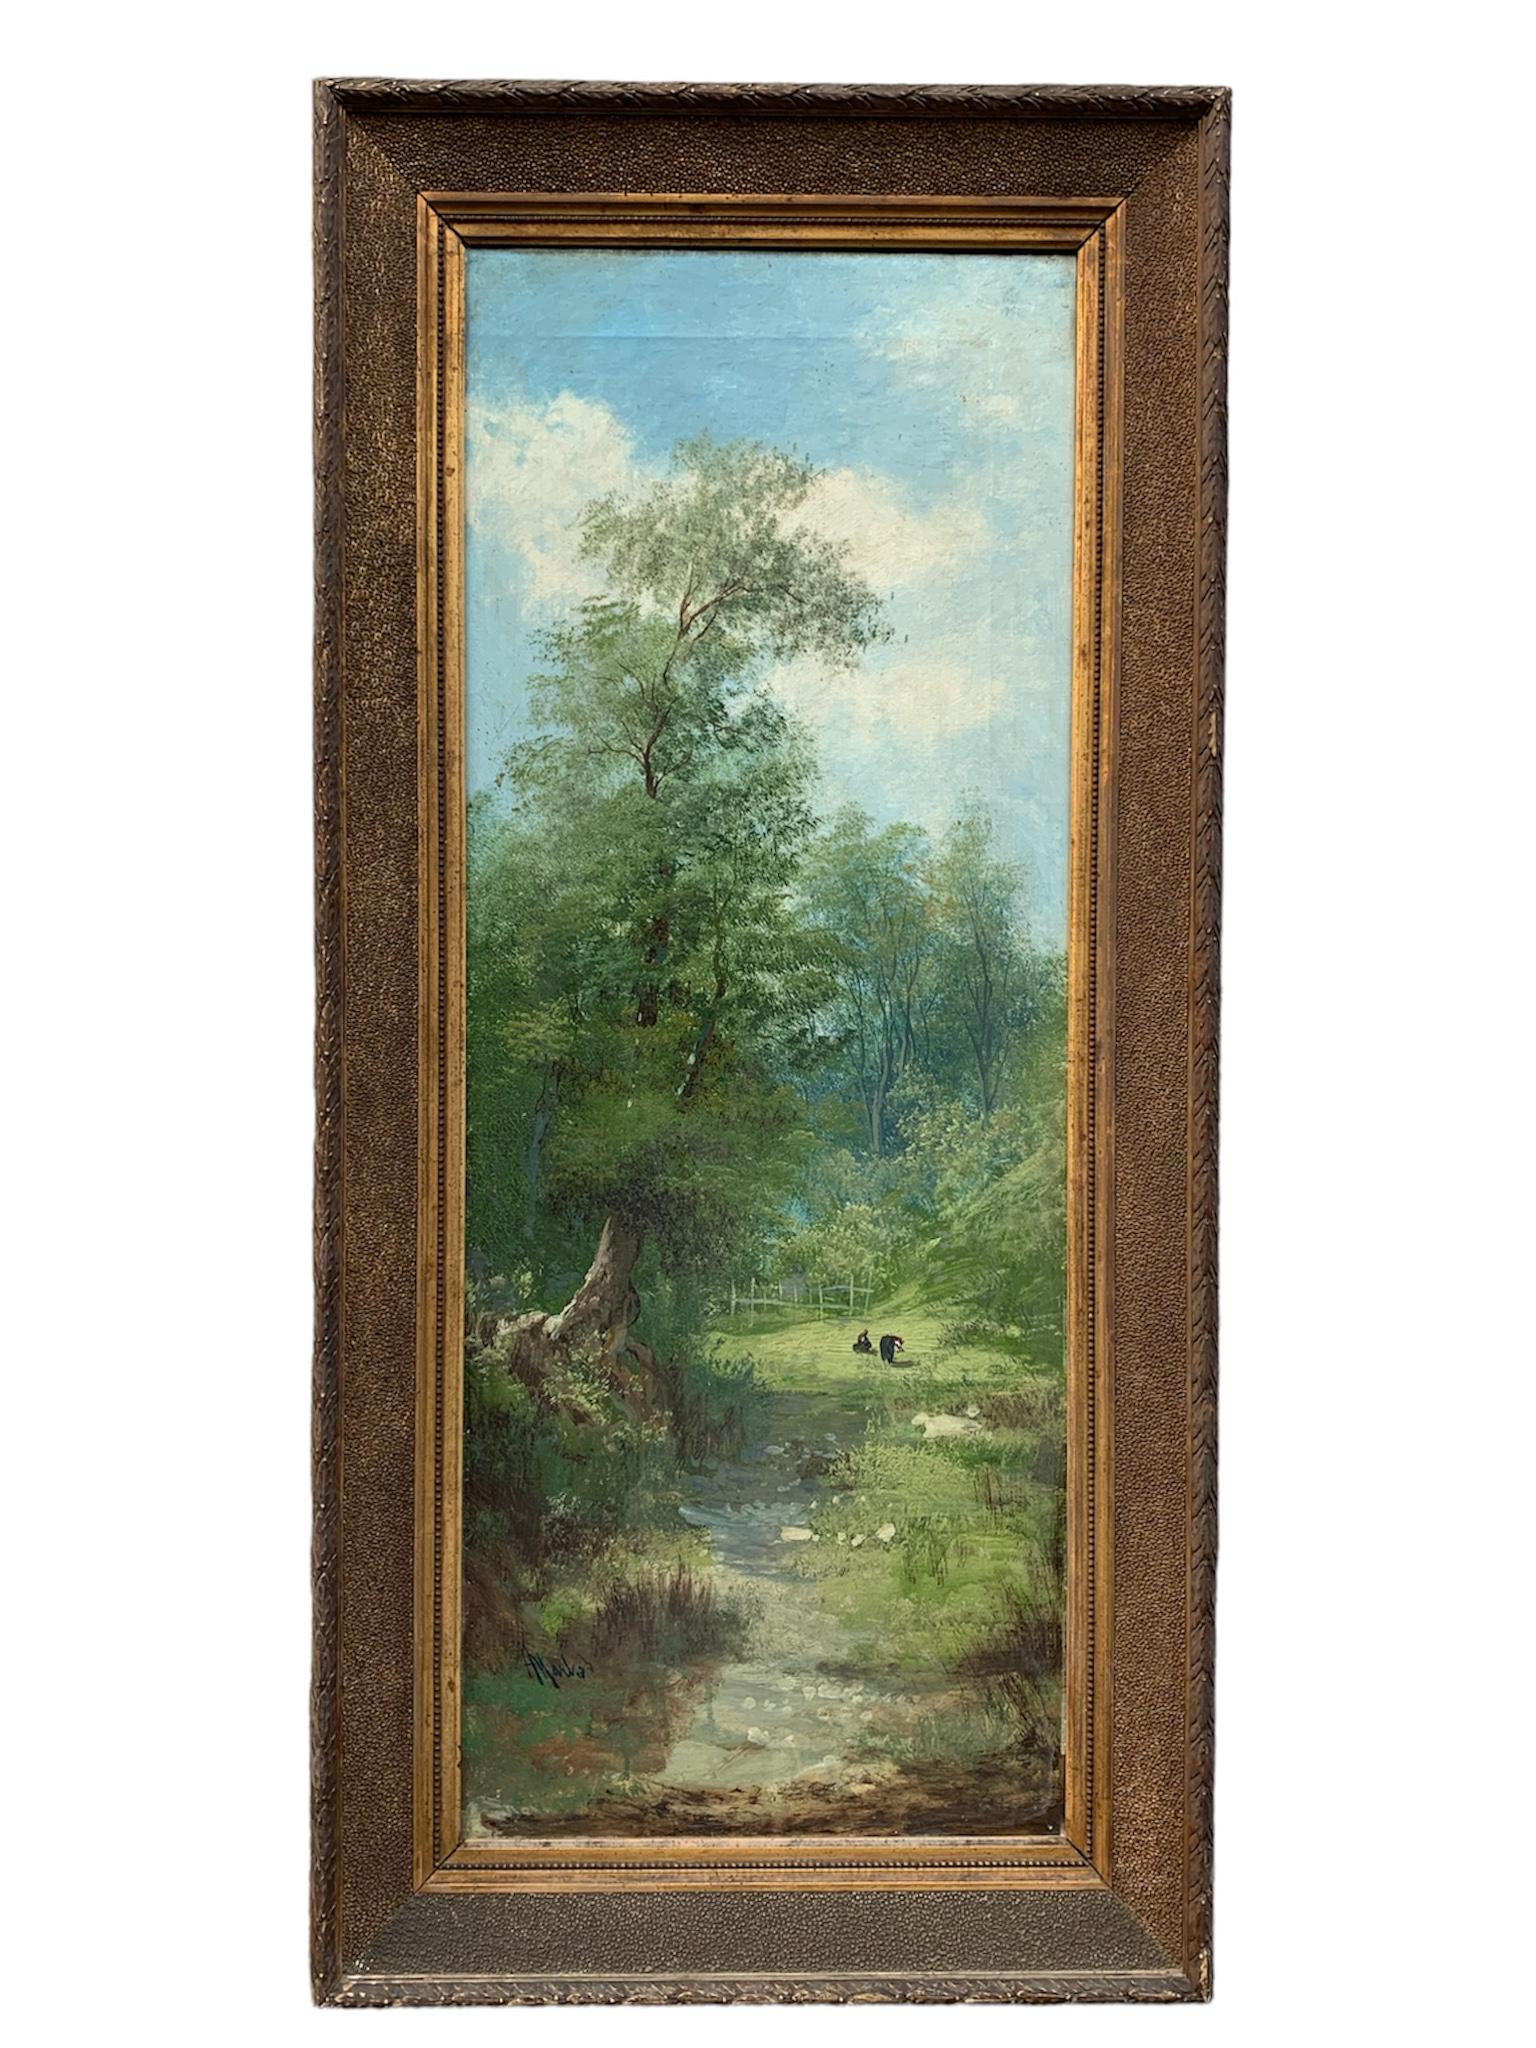 Oil painting on canvas depicting a natural summer landscape, created by Henry Markò in the early twentieth century.

Ø cm 49 h cm 105

Henry Markò, descendant of the Austrian painting dynasty of Andrea Markò, was born in Florence in 1855. His works